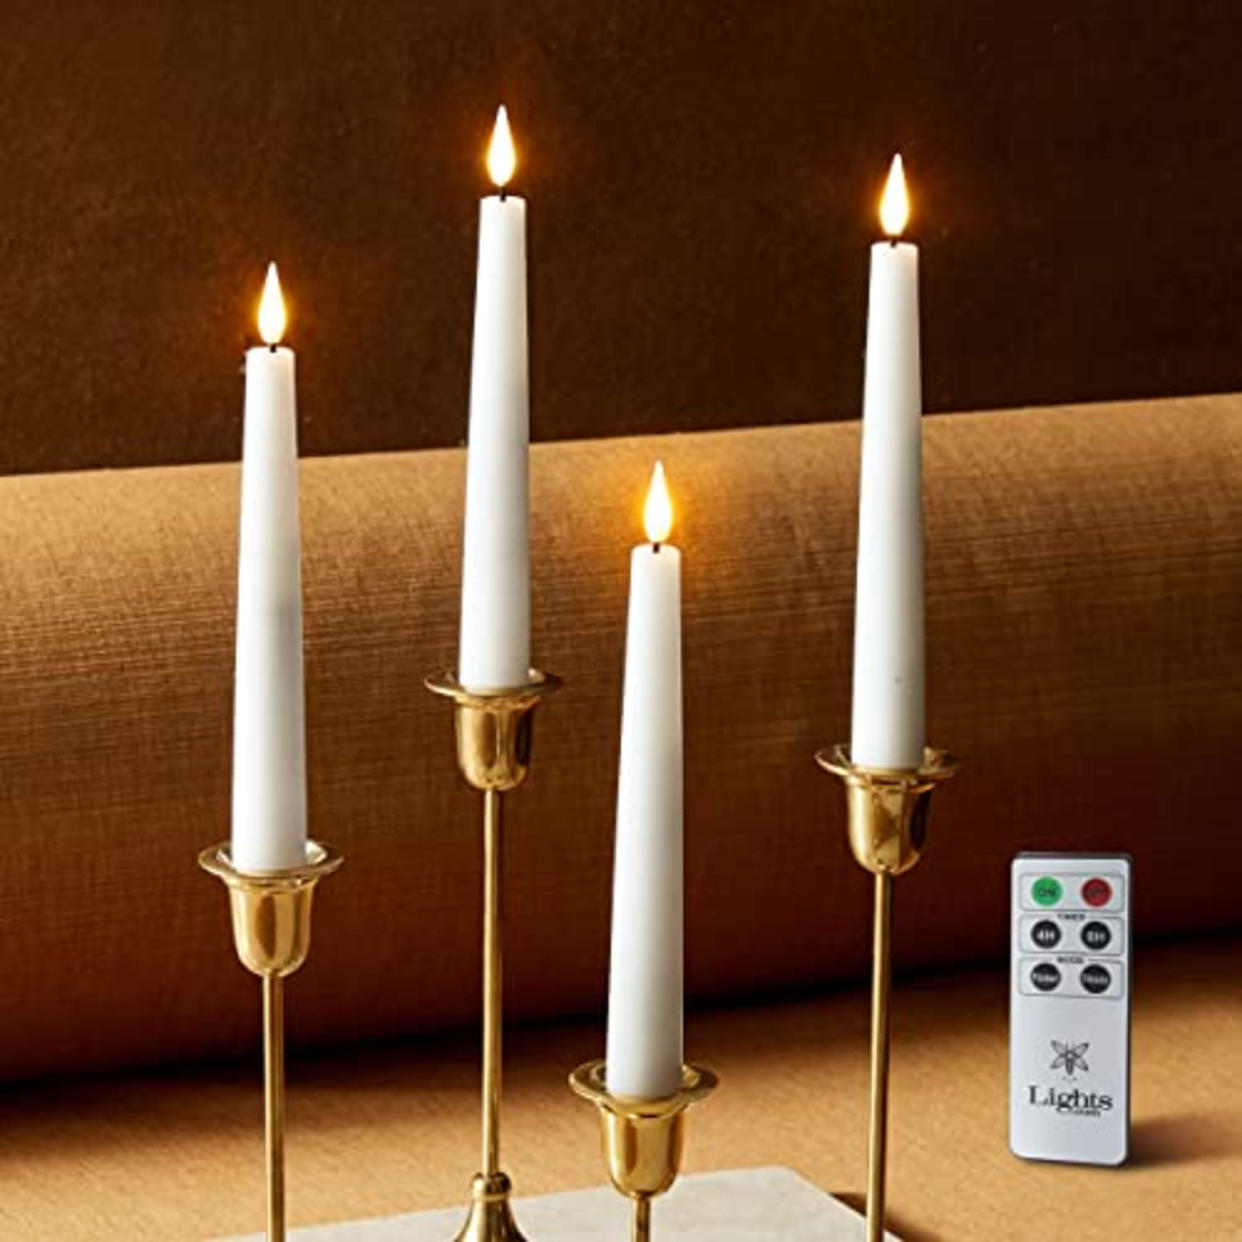 LampLust 7 Inch Flameless Taper Candles - Realistic 3D Flame with Wick, White Real Wax, Flickering Flameless Candle LED, Home Decor, Automatic Timer, Remote Control and Batteries Included - Set of 4 (AMAZON)